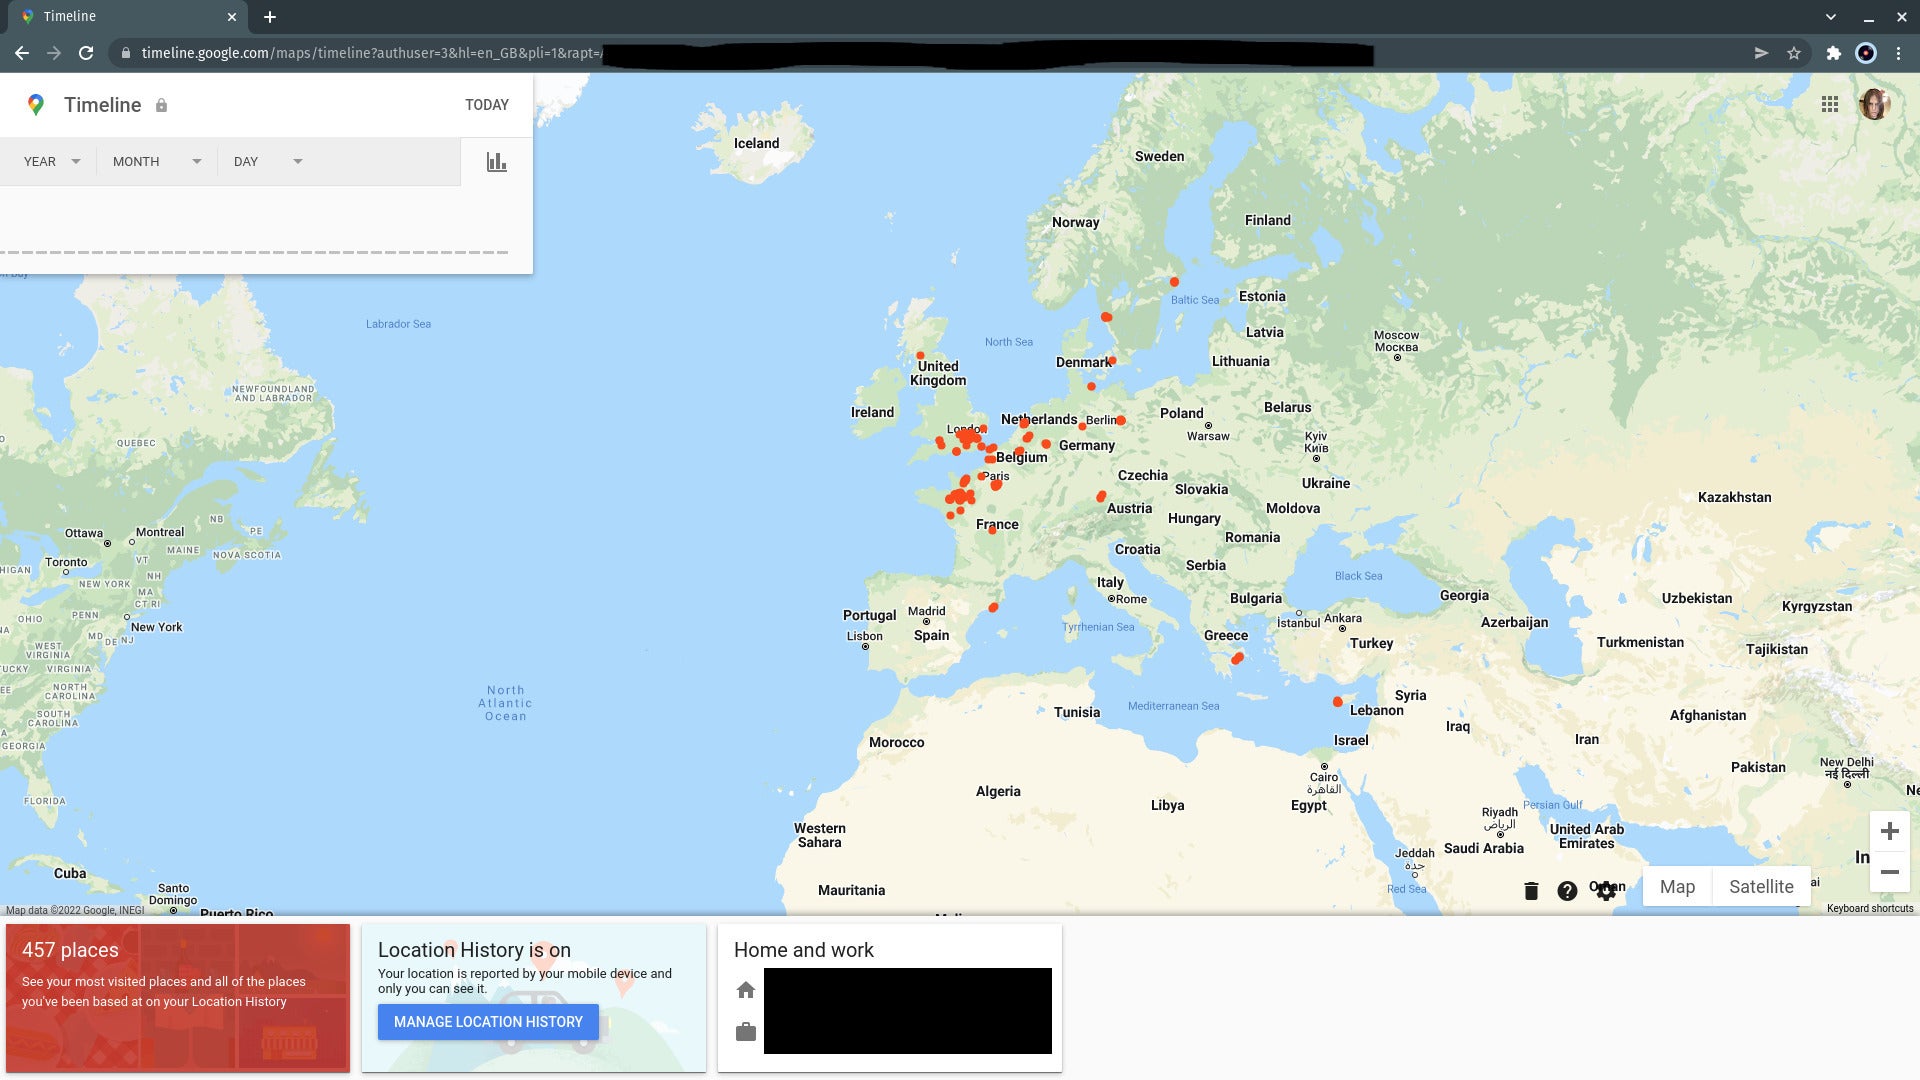 The Manage History map shows dots around Europe where the user has been